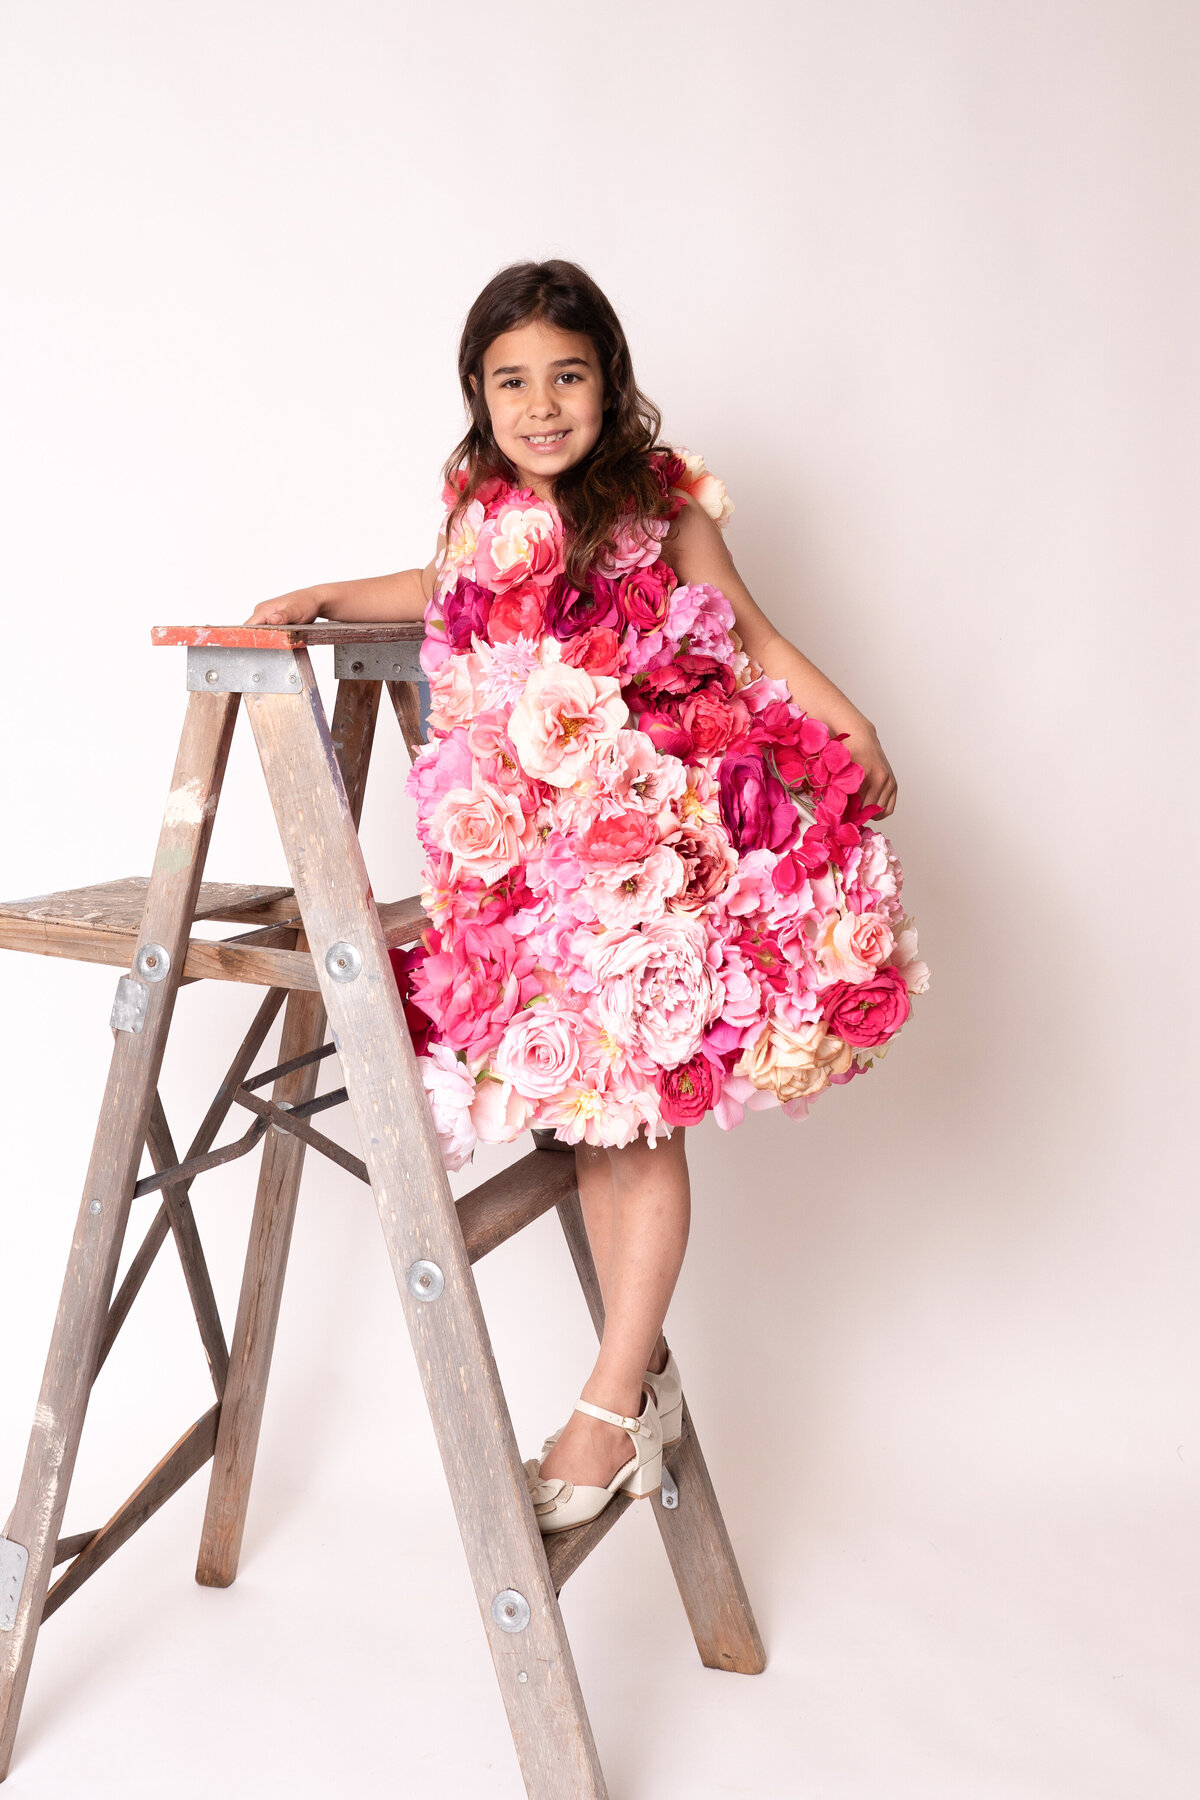 childrens photography kid couture flowers. roses